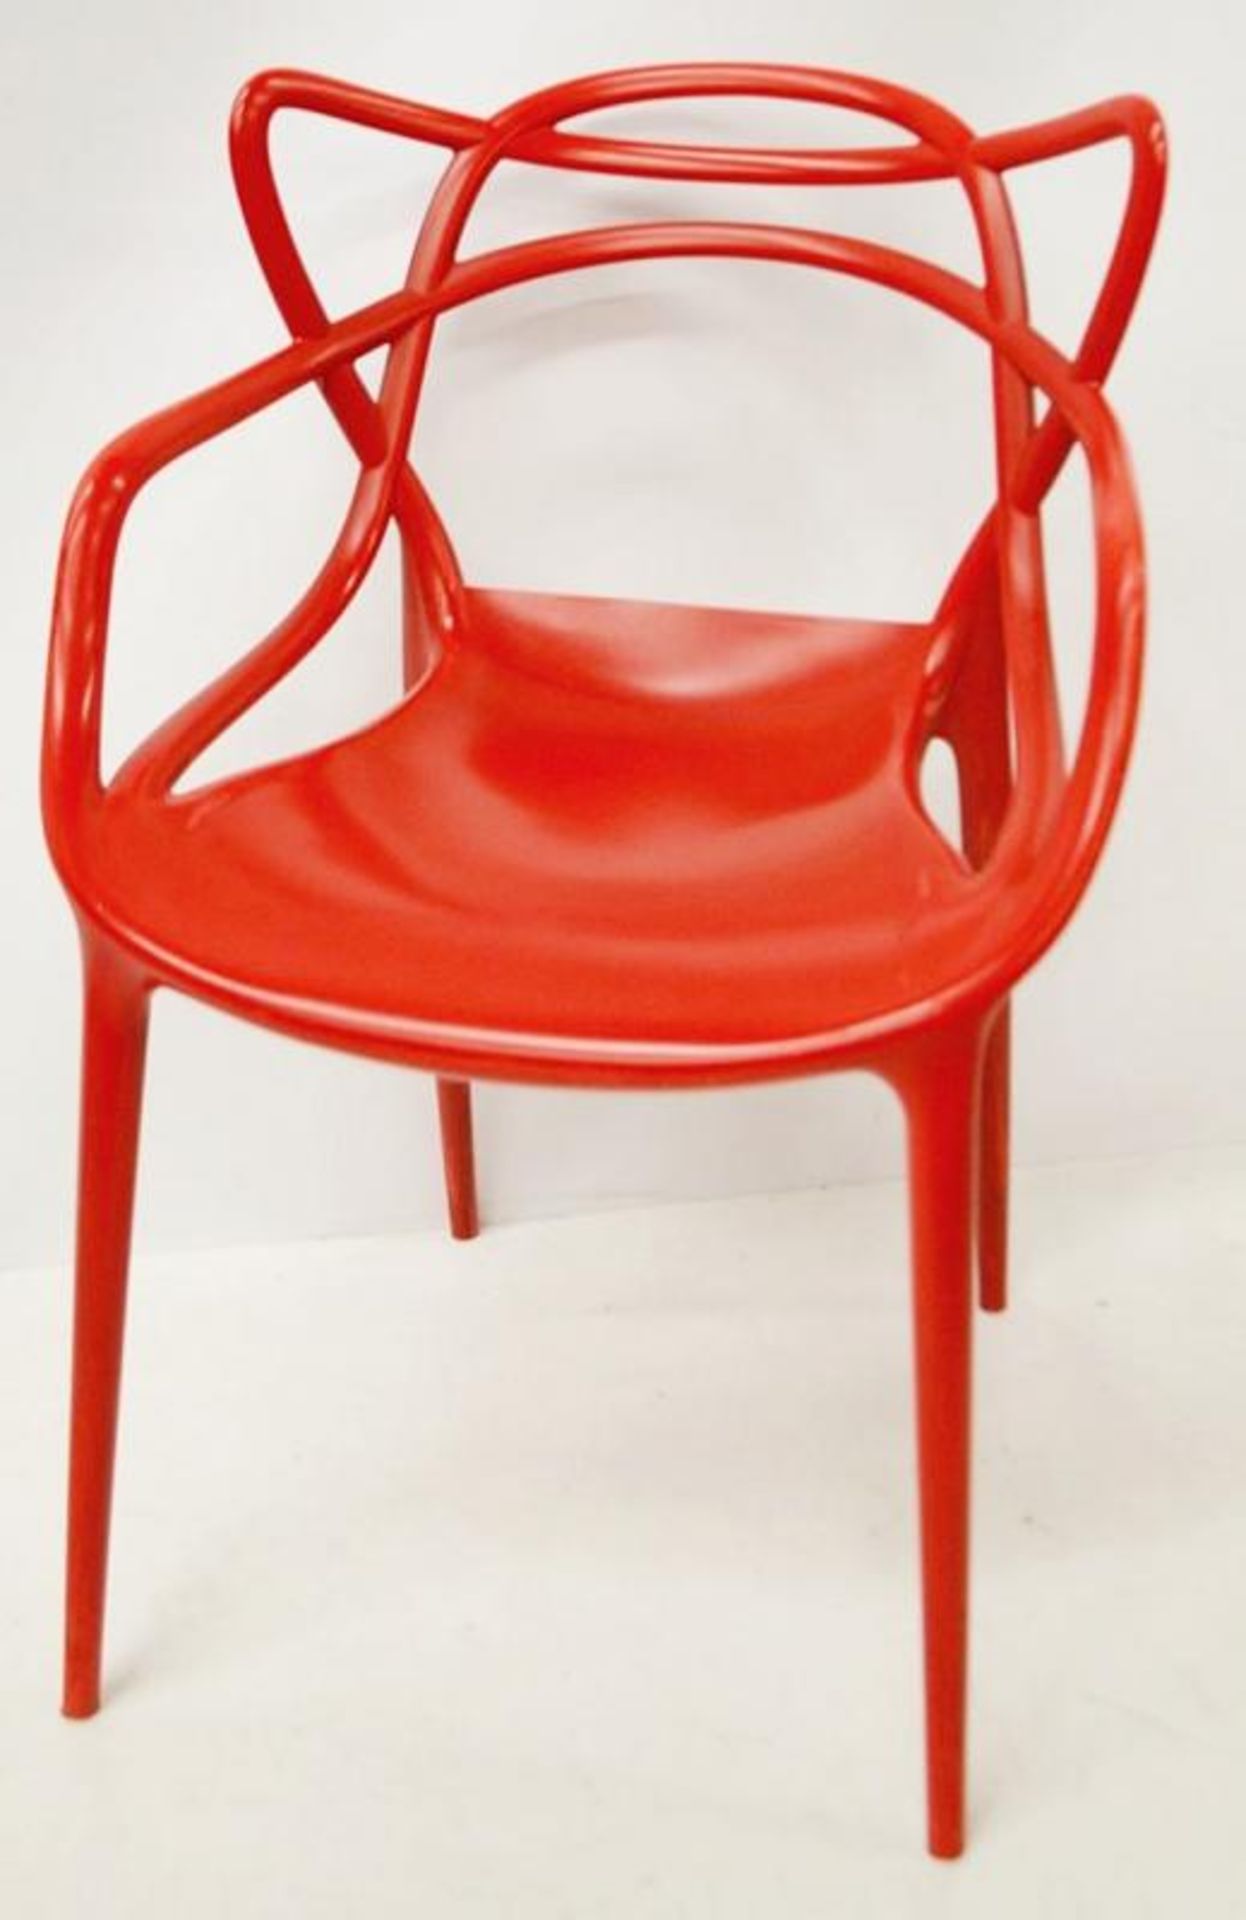 12 x Philippe Starck For Kartell 'Masters' Designer Bistro Chairs - Includes 10 x Red And 2 x Black